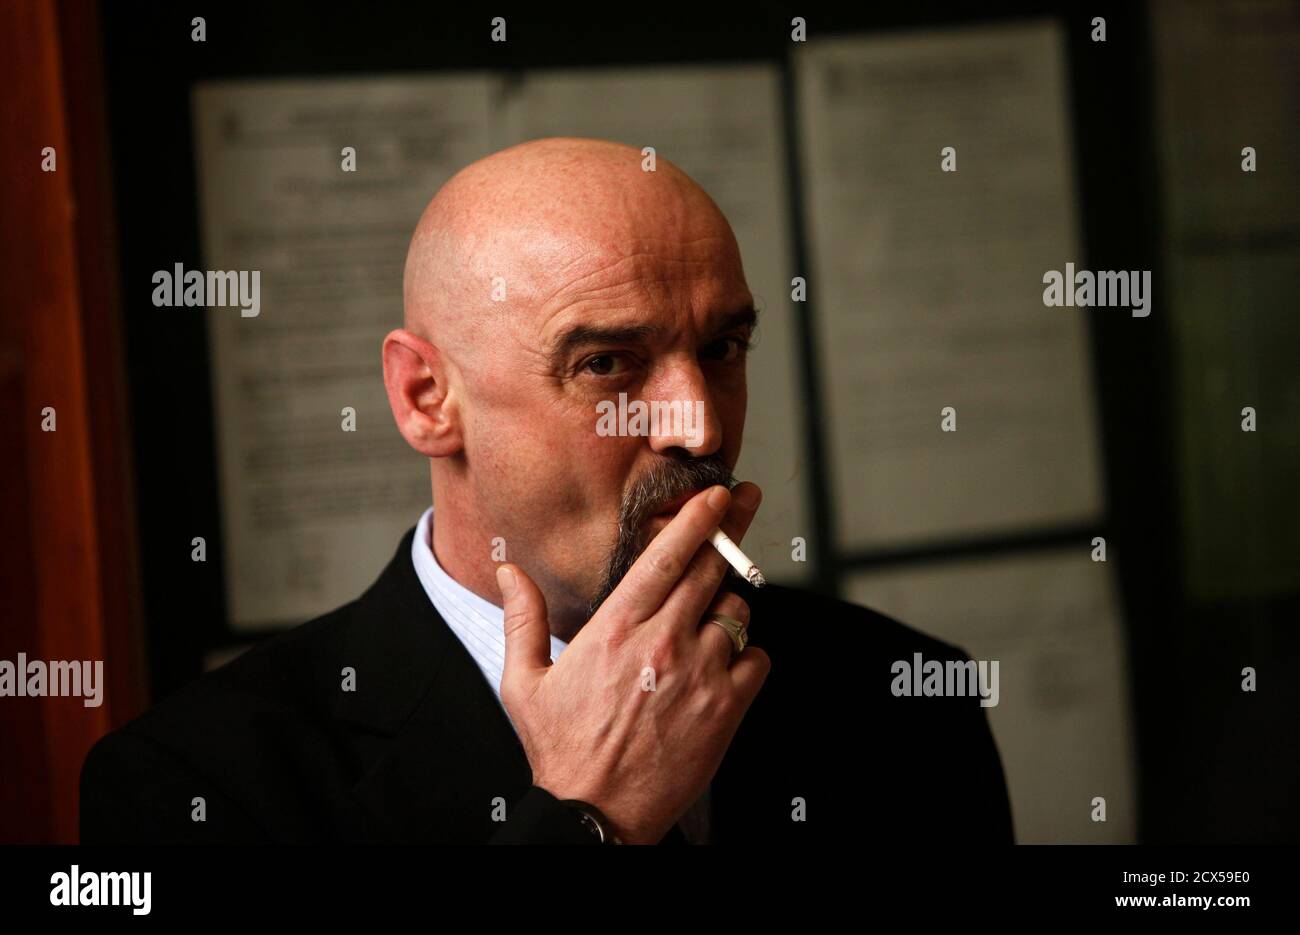 praise smoke mow Romanian Nicolae Popa smokes a cigarette as wait he waits for his  deportation trial at a south Jakarta court November 29, 2010. Popa was  convicted in absentia for defrauding more than 100,000